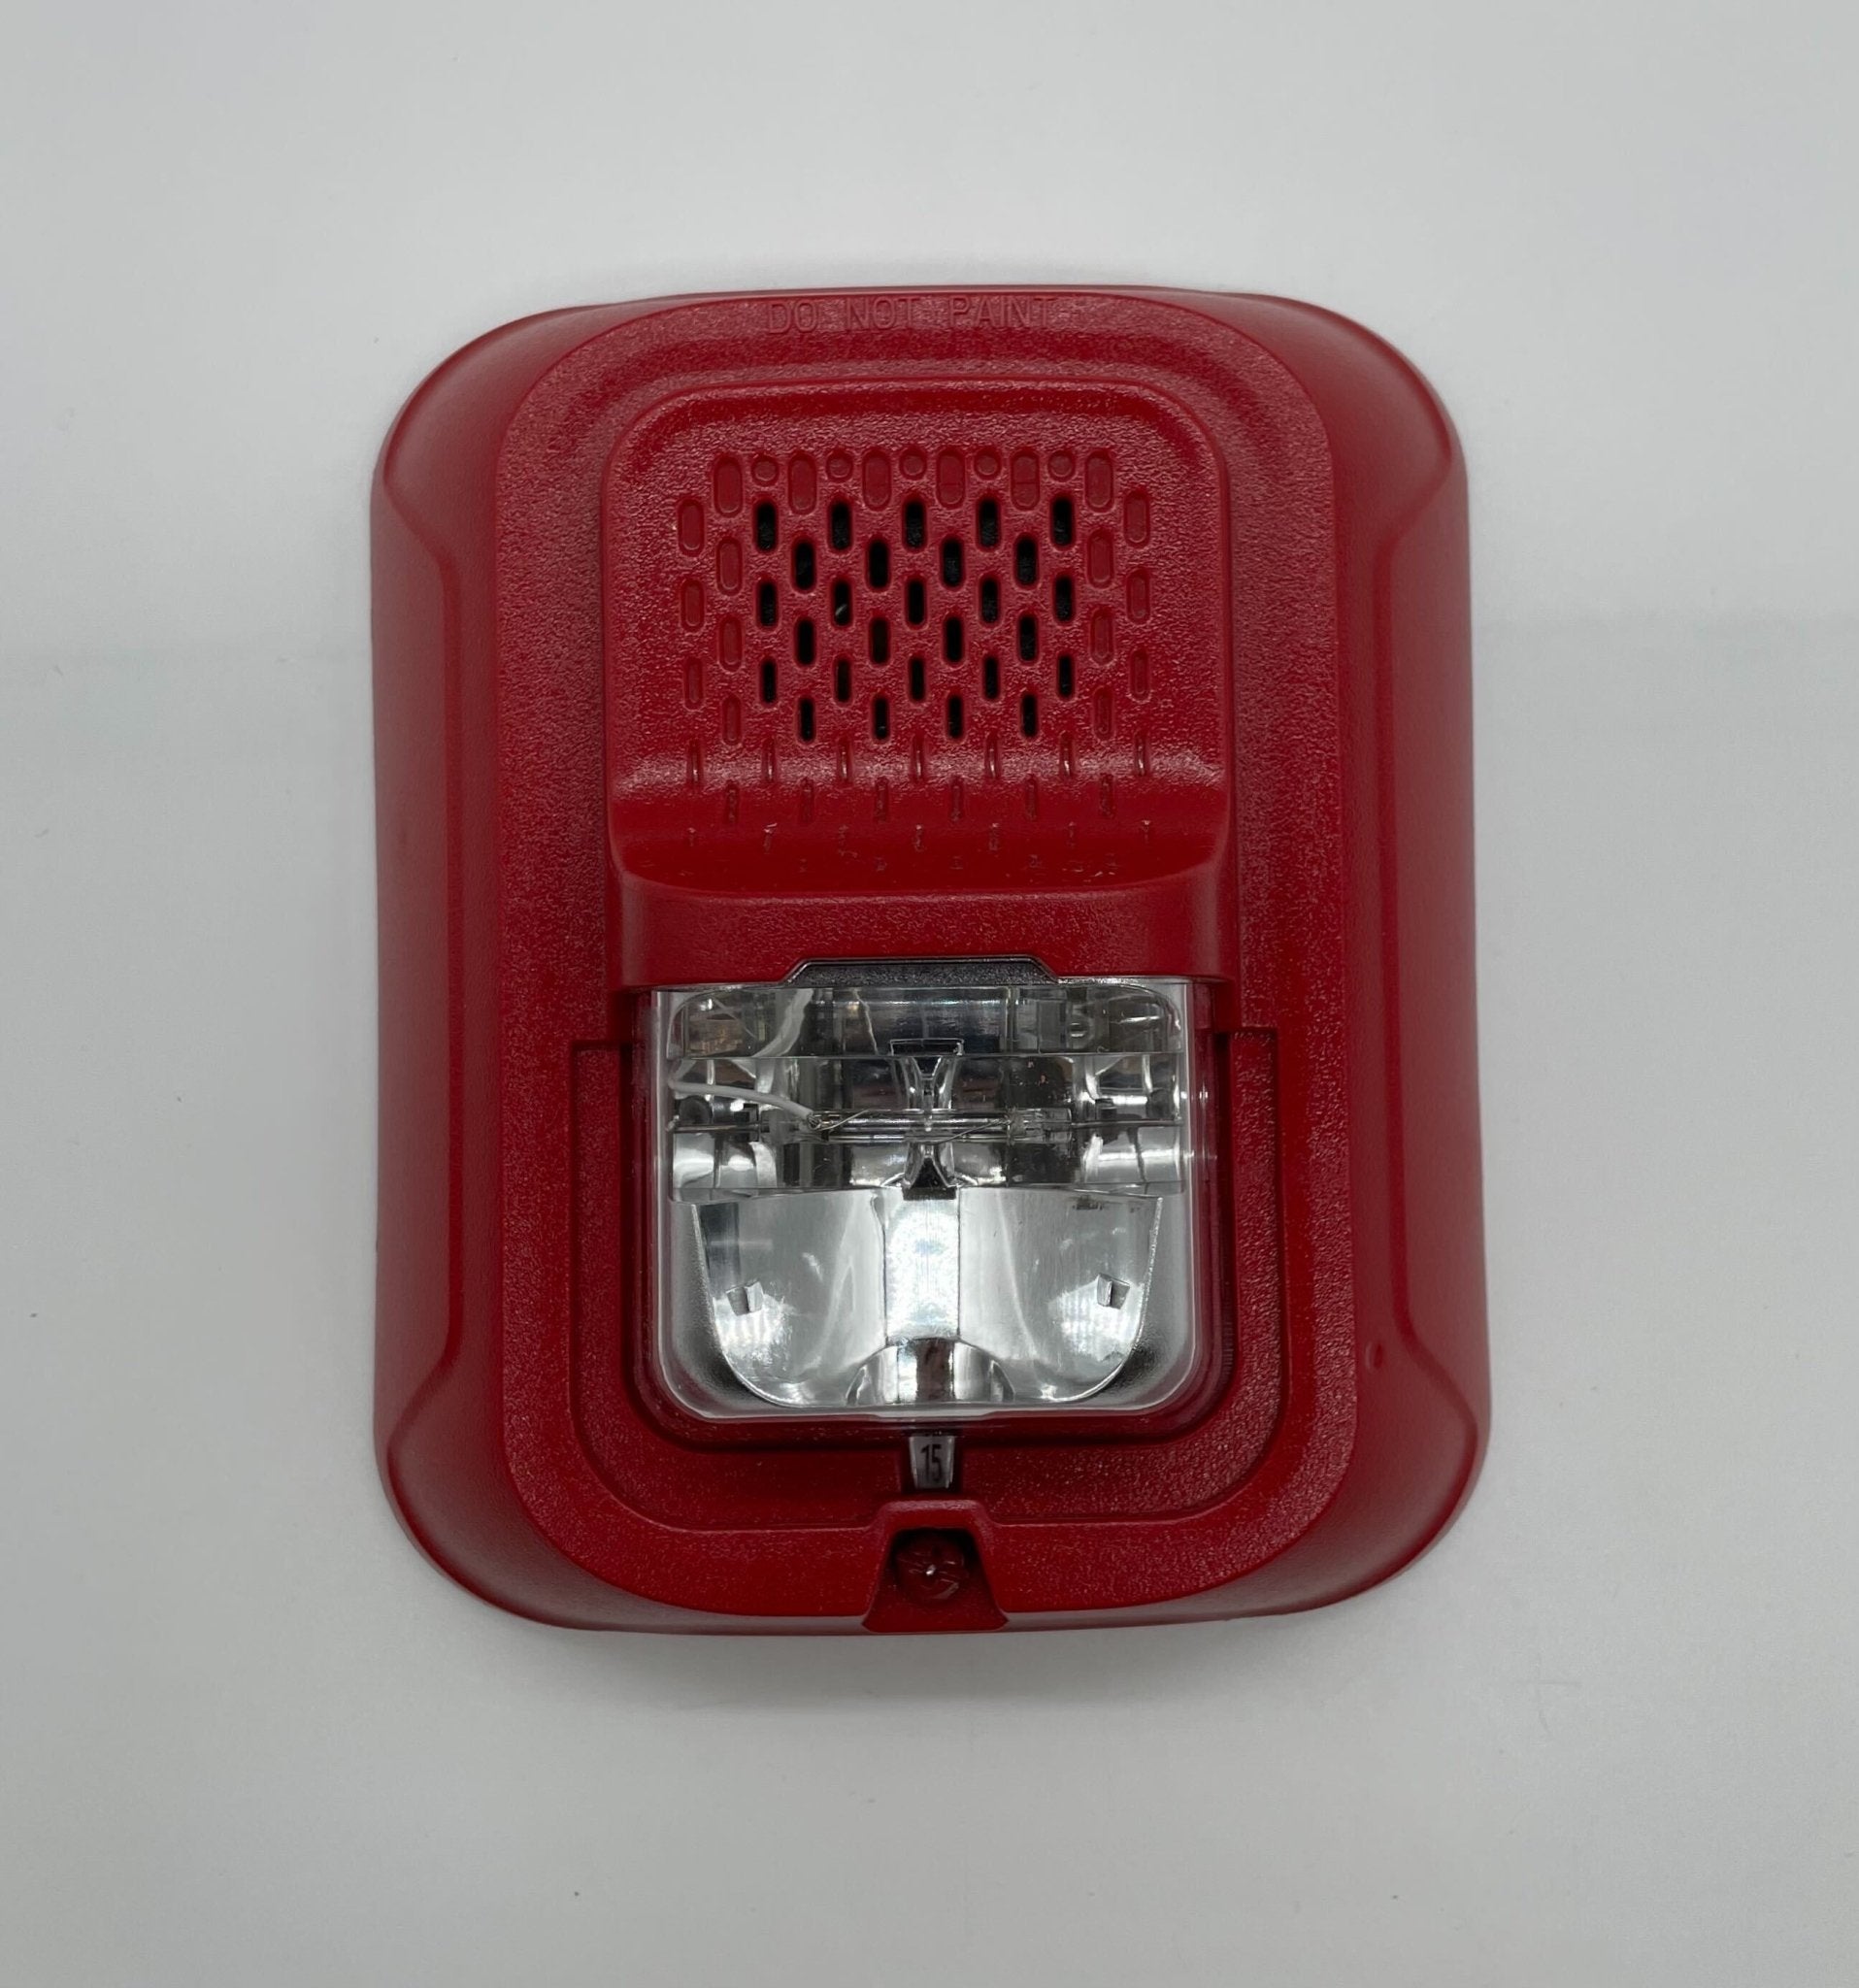 System Sensor P2RL-P Horn Strobe 2-Wire Wall Mount - The Fire Alarm Supplier